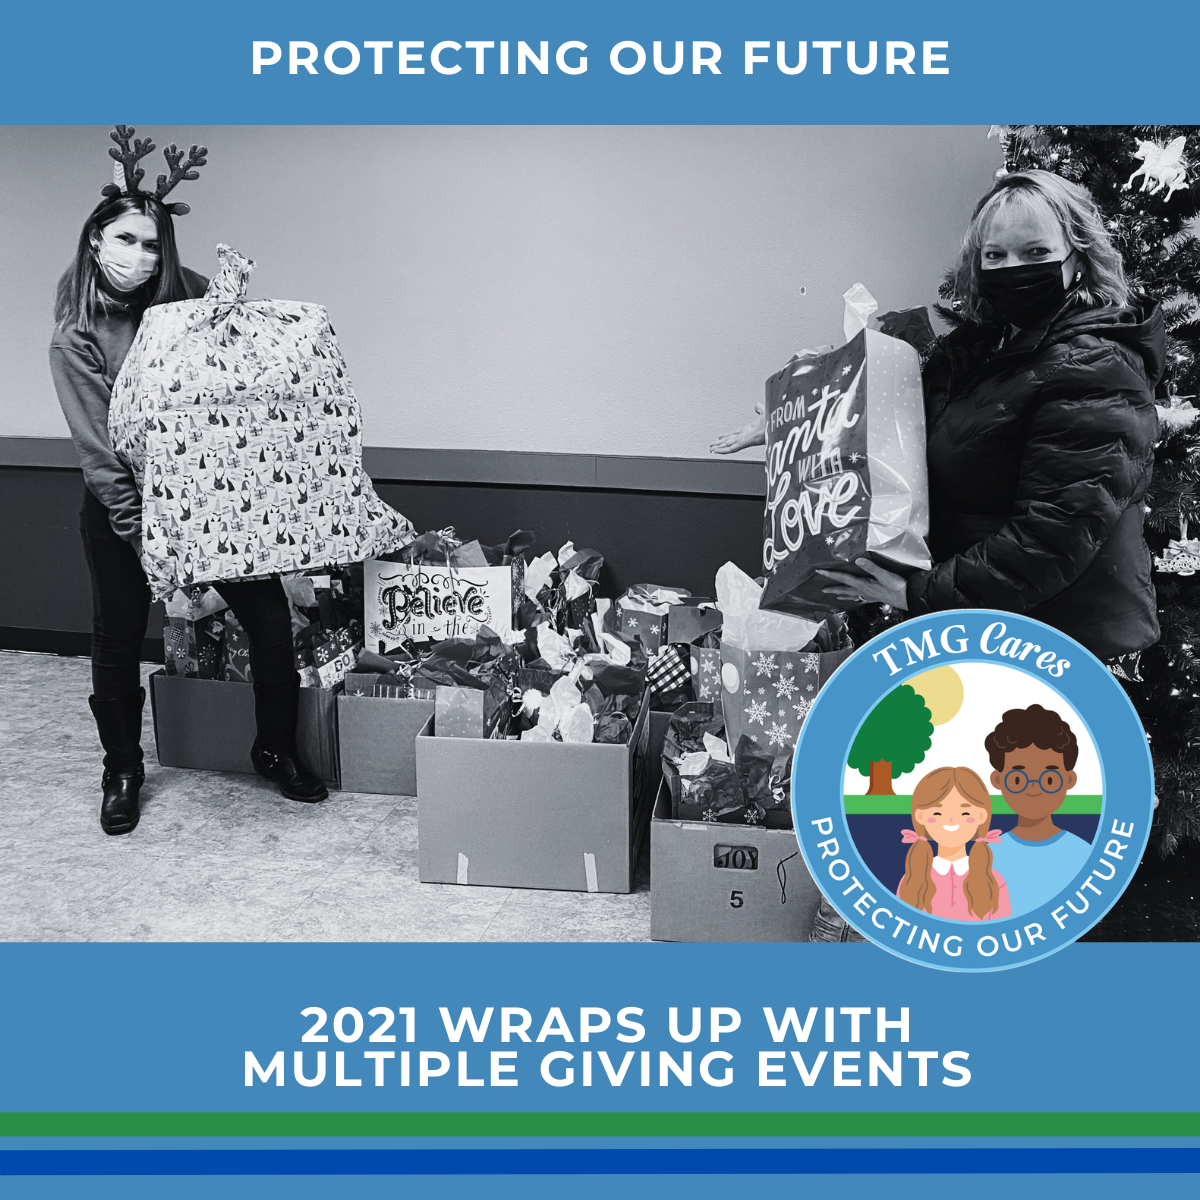 Protecting our future 2021 wraps up with multiple giving events